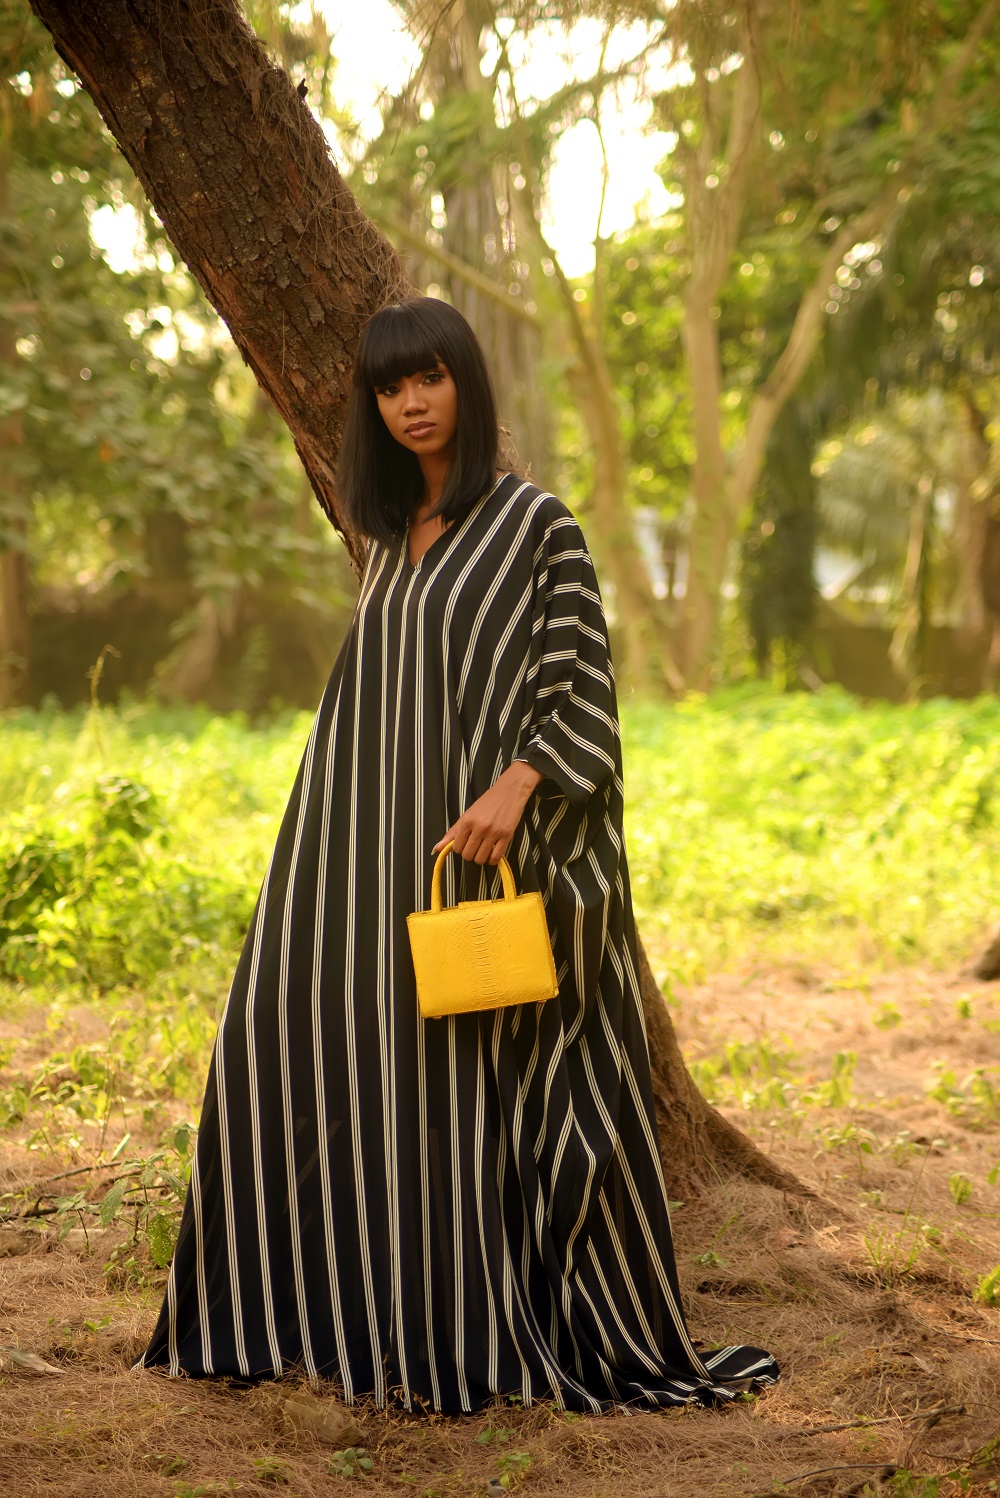 Love Colour and Comfort? Wanni Fuga’s Latest Collection Will Make Your Day